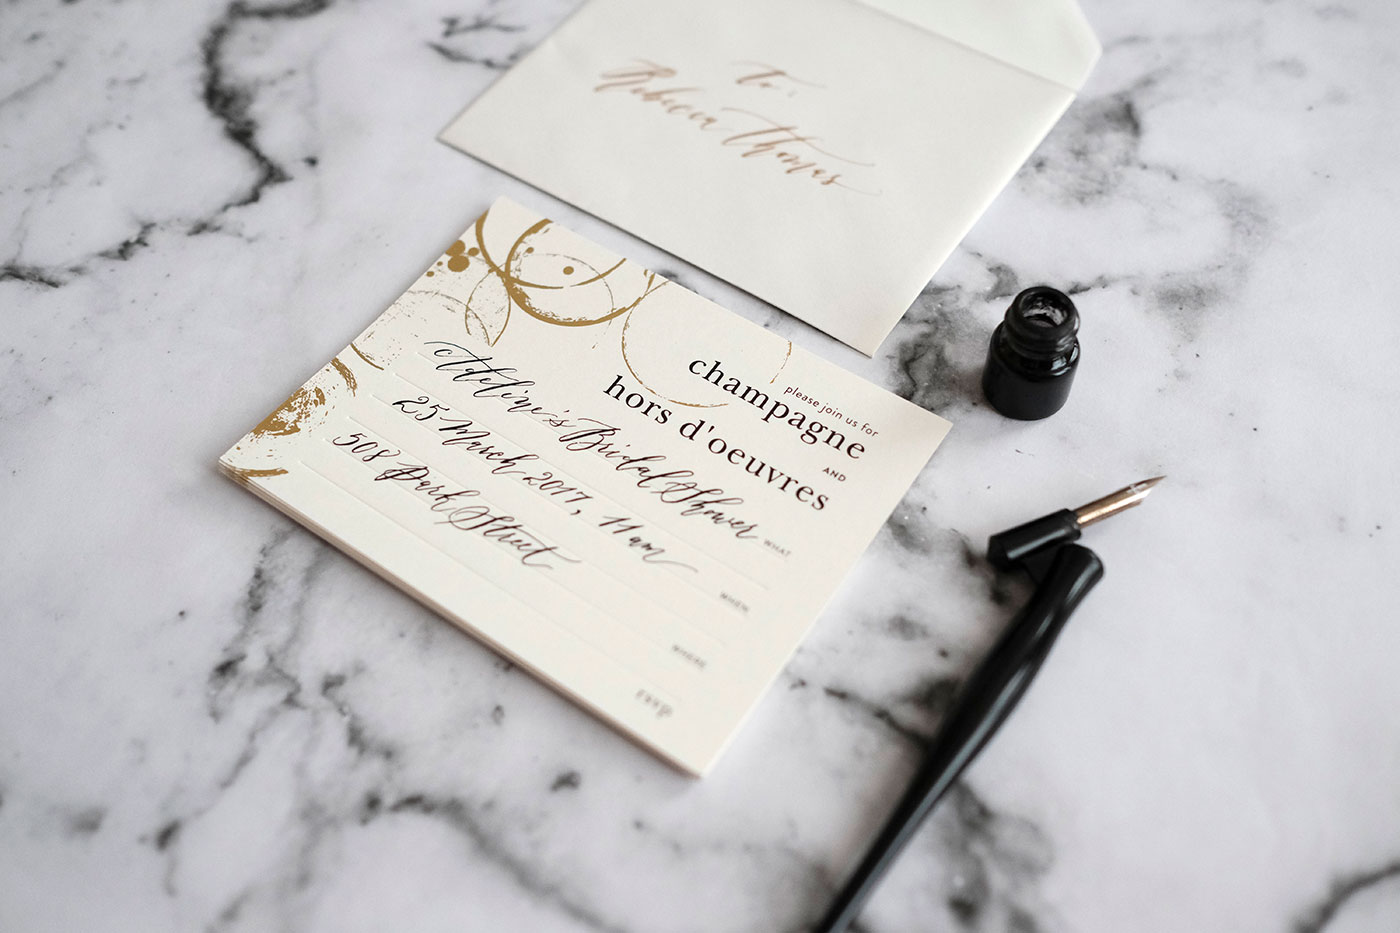 Paper Provision Calligraphy & Photo Styling gallery image